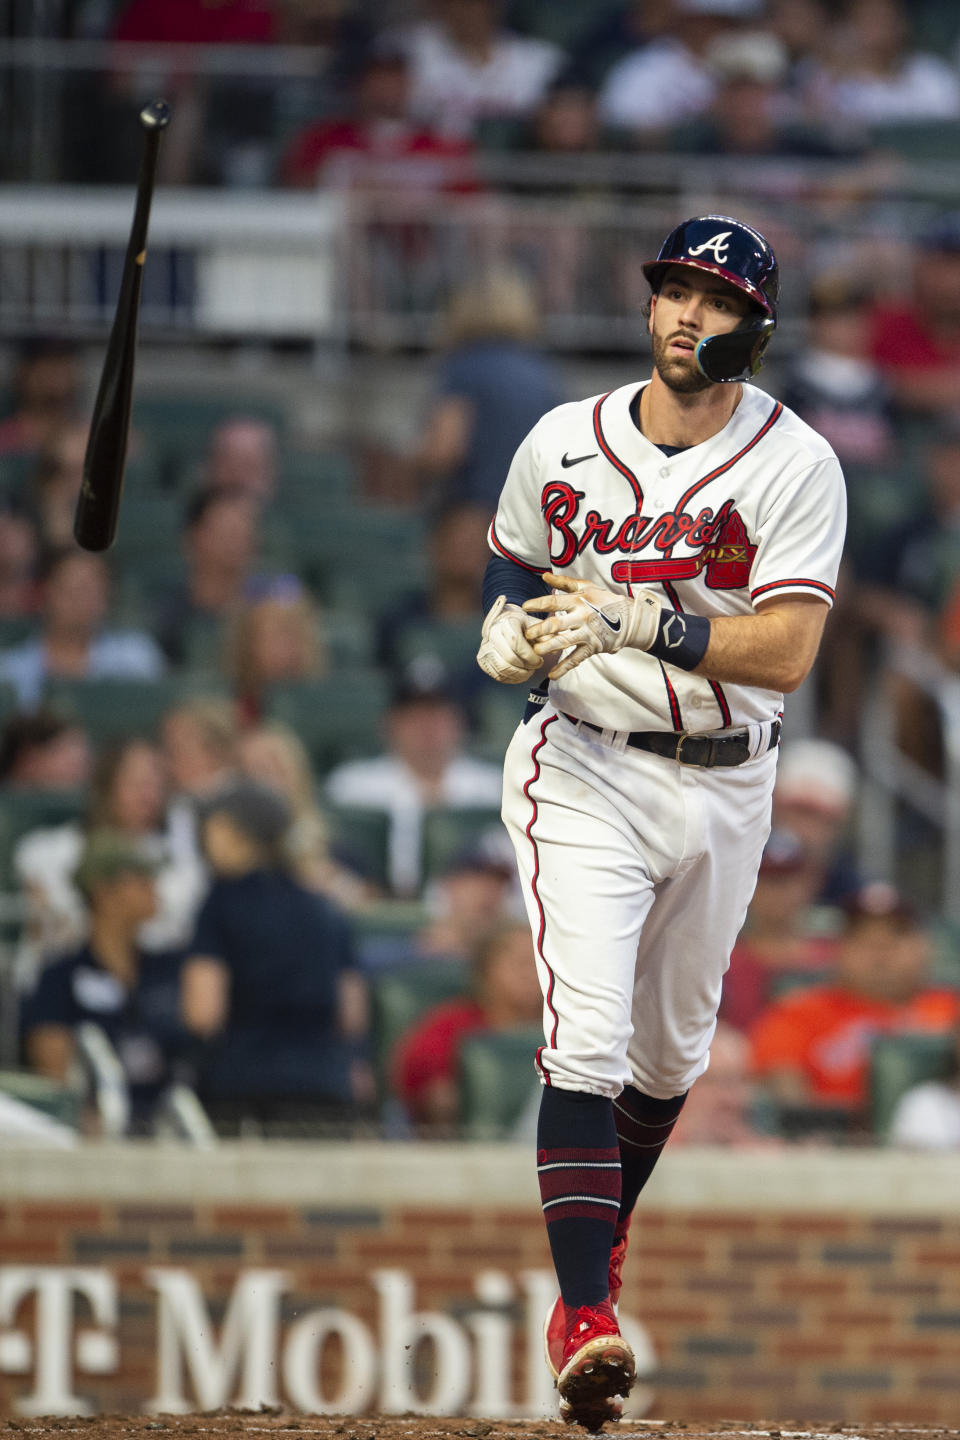 Atlanta Braves Dansby Swanson tosses the bat after ball four in the fourth inning of a baseball game against the Houston Astros Saturday, Aug. 20, 2022, in Atlanta. (AP Photo/Hakim Wright Sr.)